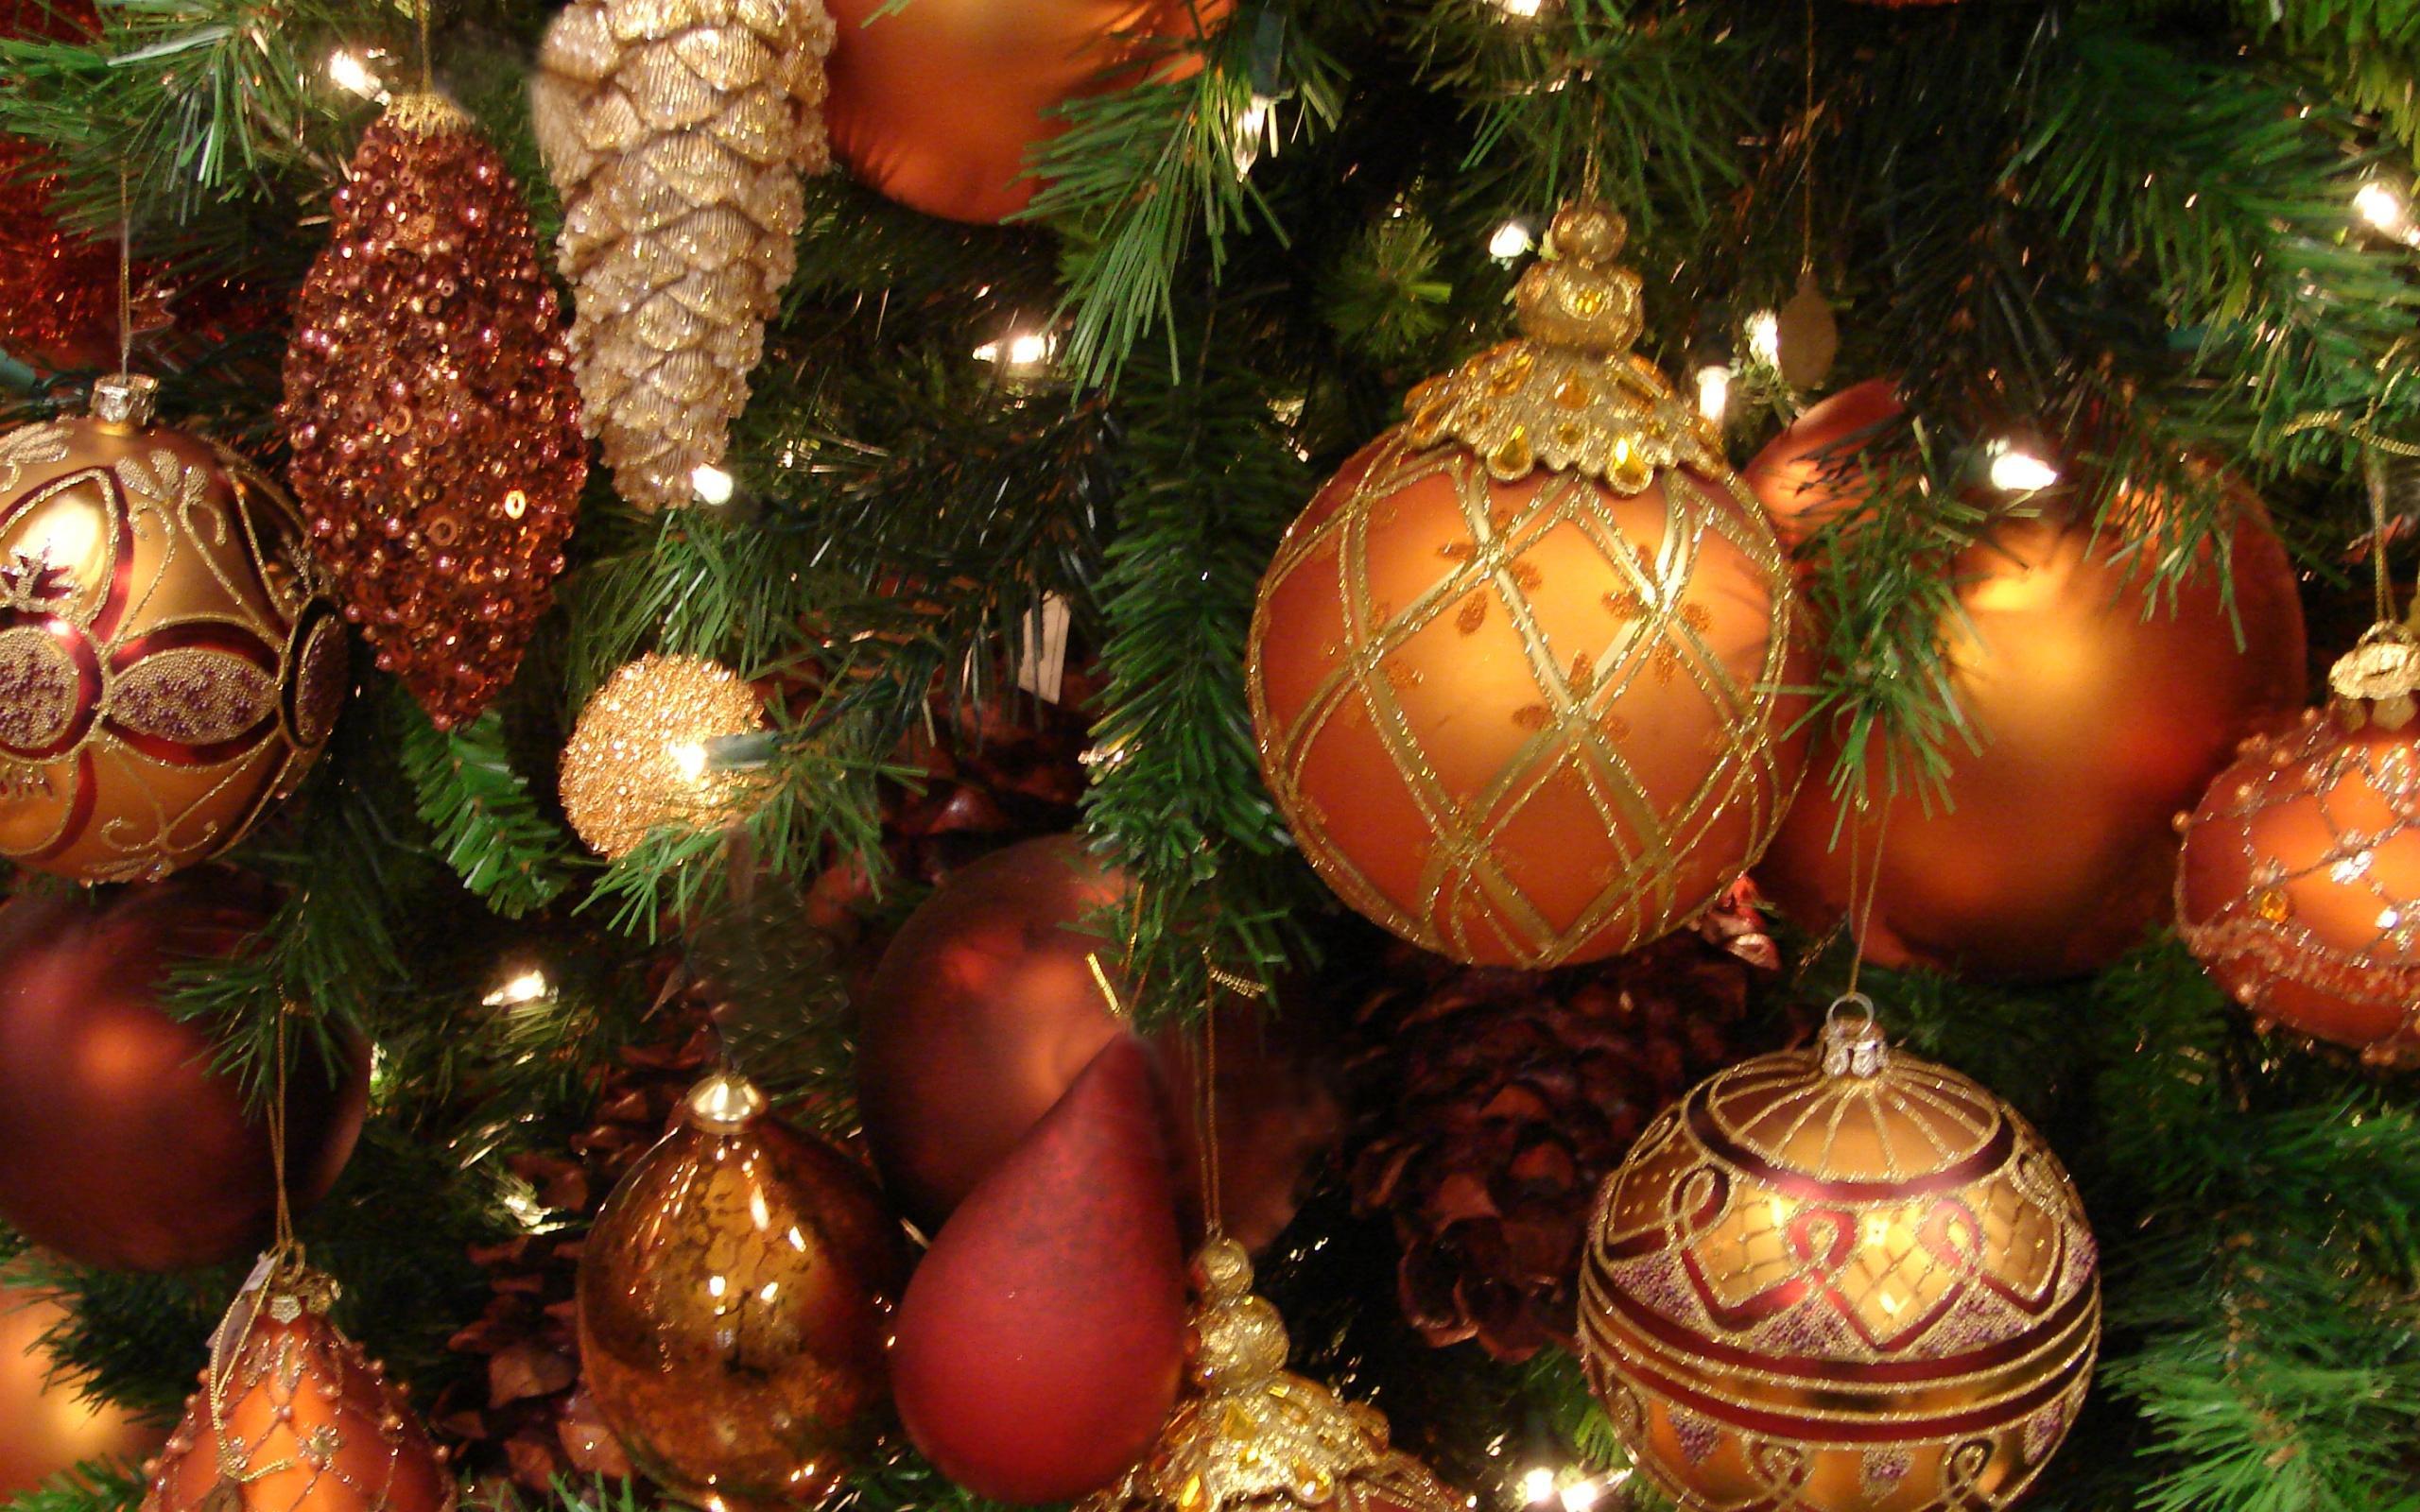 Holiday decorations Christmas tree 2014 wallpapers and images